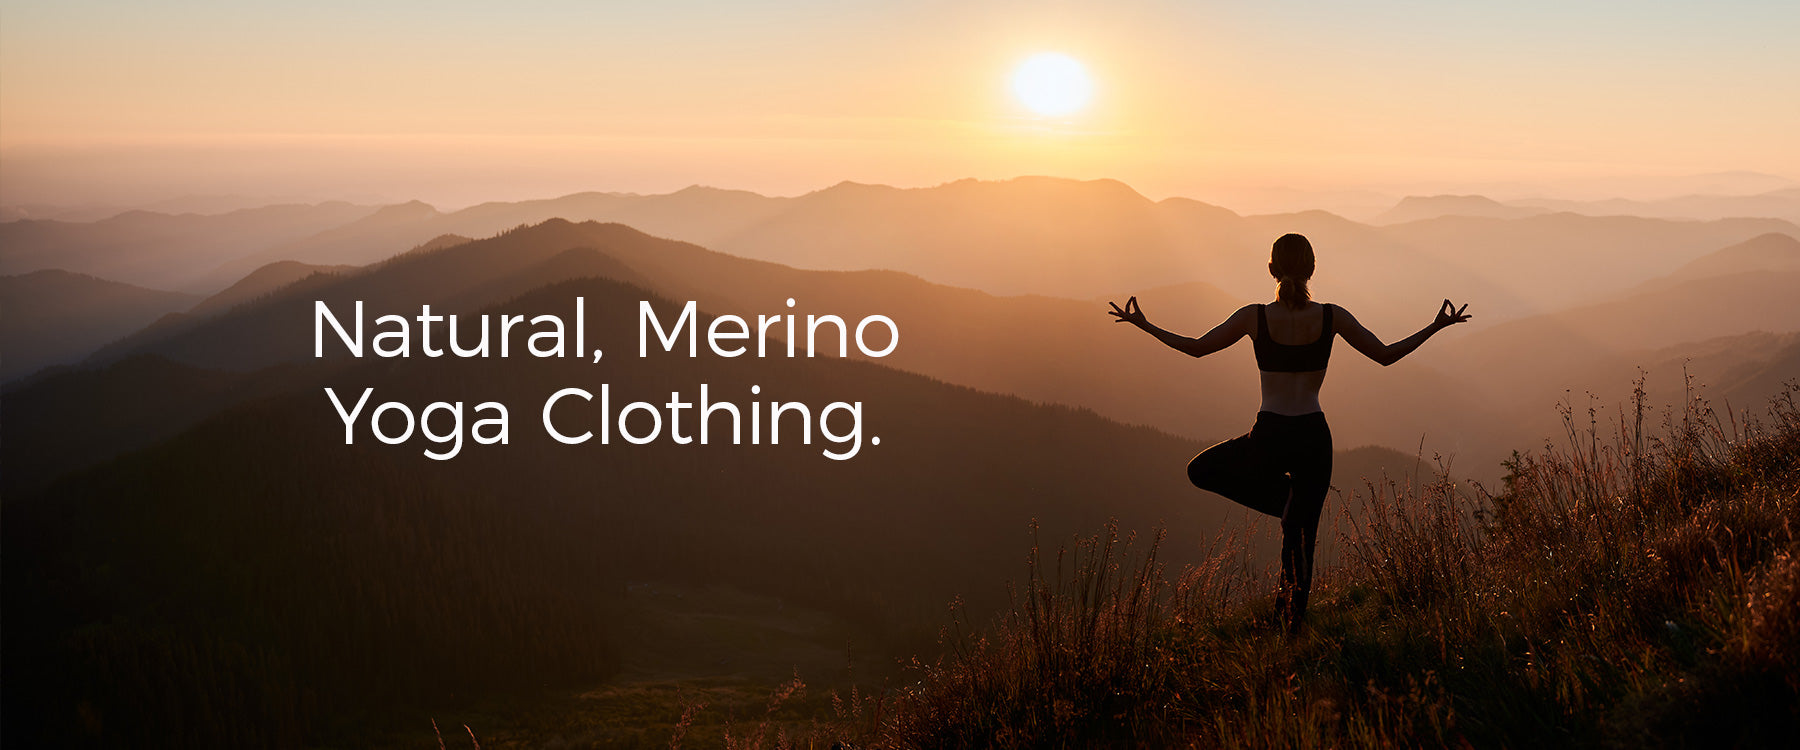 Image of person on a mountain, in a yoga pose, silhouetted by the sun in the distance. Text in white to the left 'Natural, Merino Yoga Clothing'.